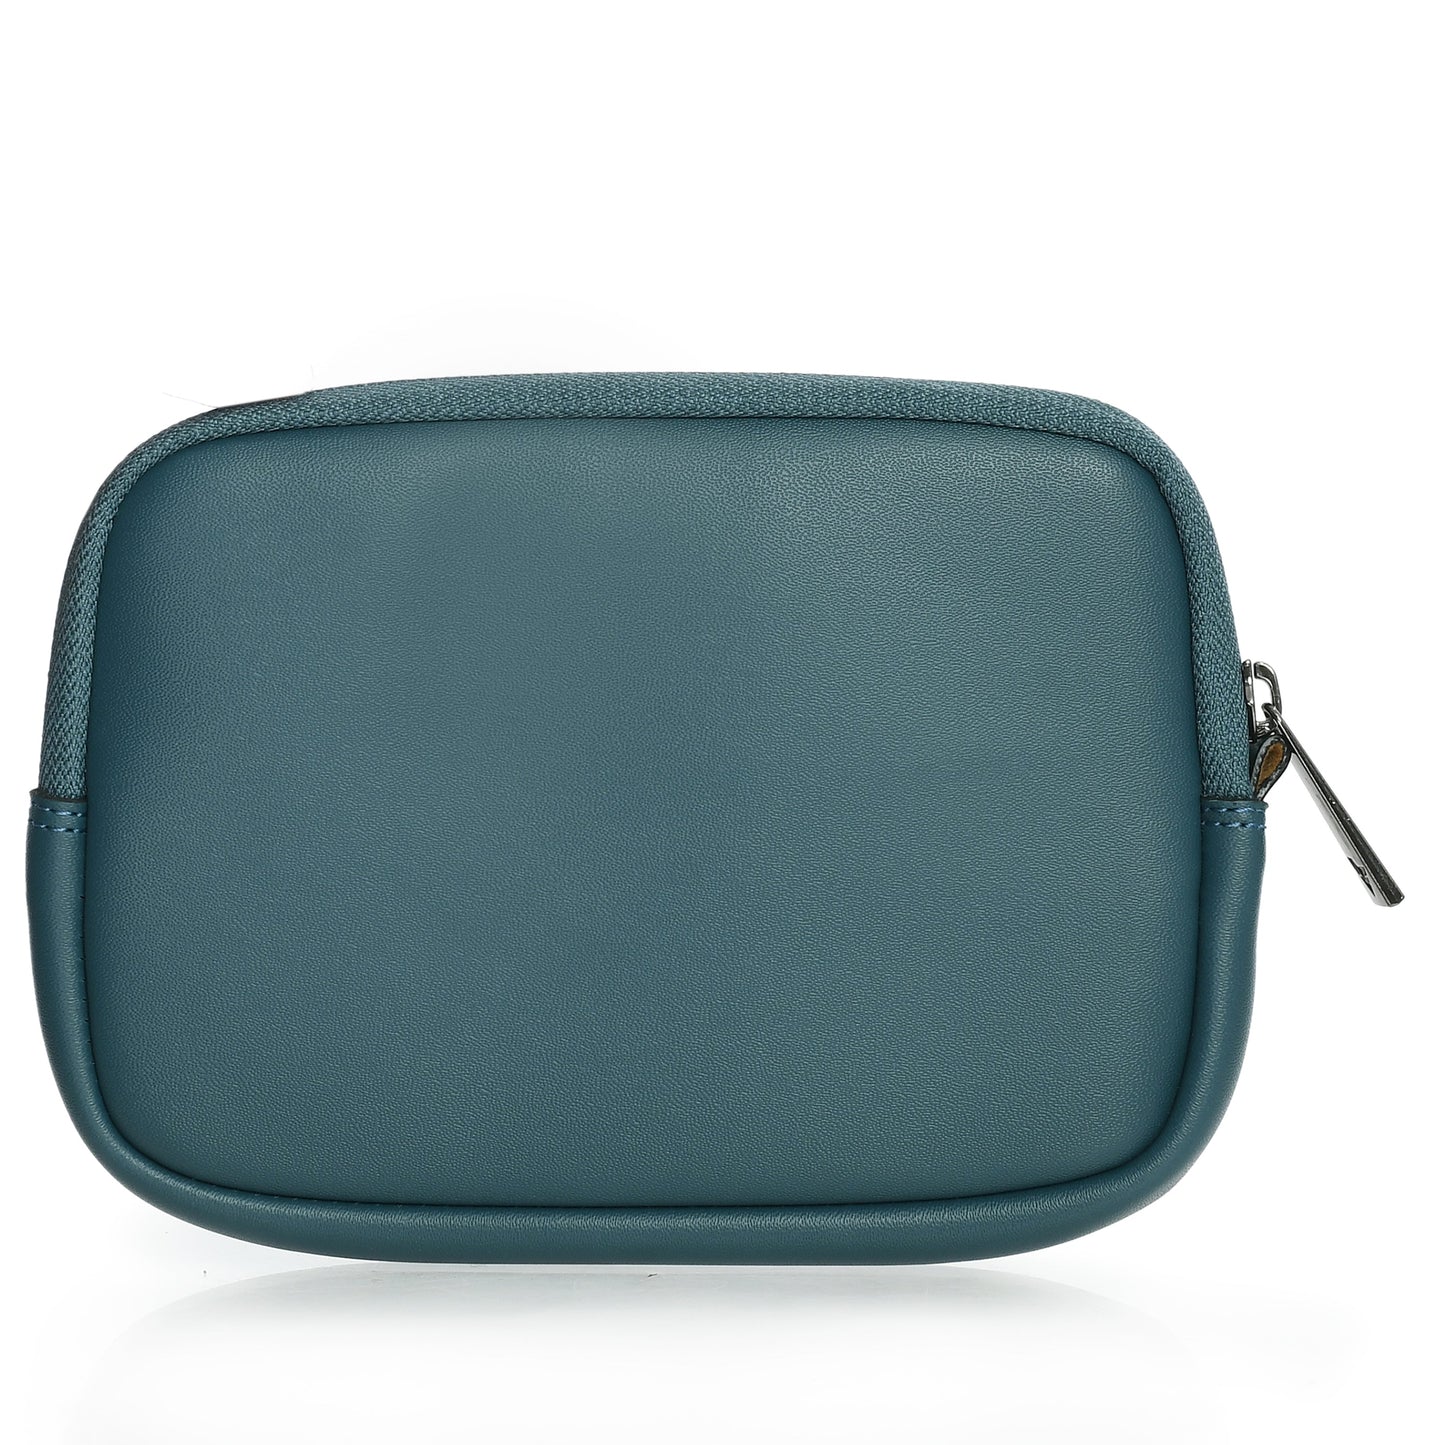 vaku-luxos®-da-italiano-refined-leather-sleeve-with-free-pouch-strap-highly-durable-compatilbe-for-macbook-14-peacock-blue8905129015190